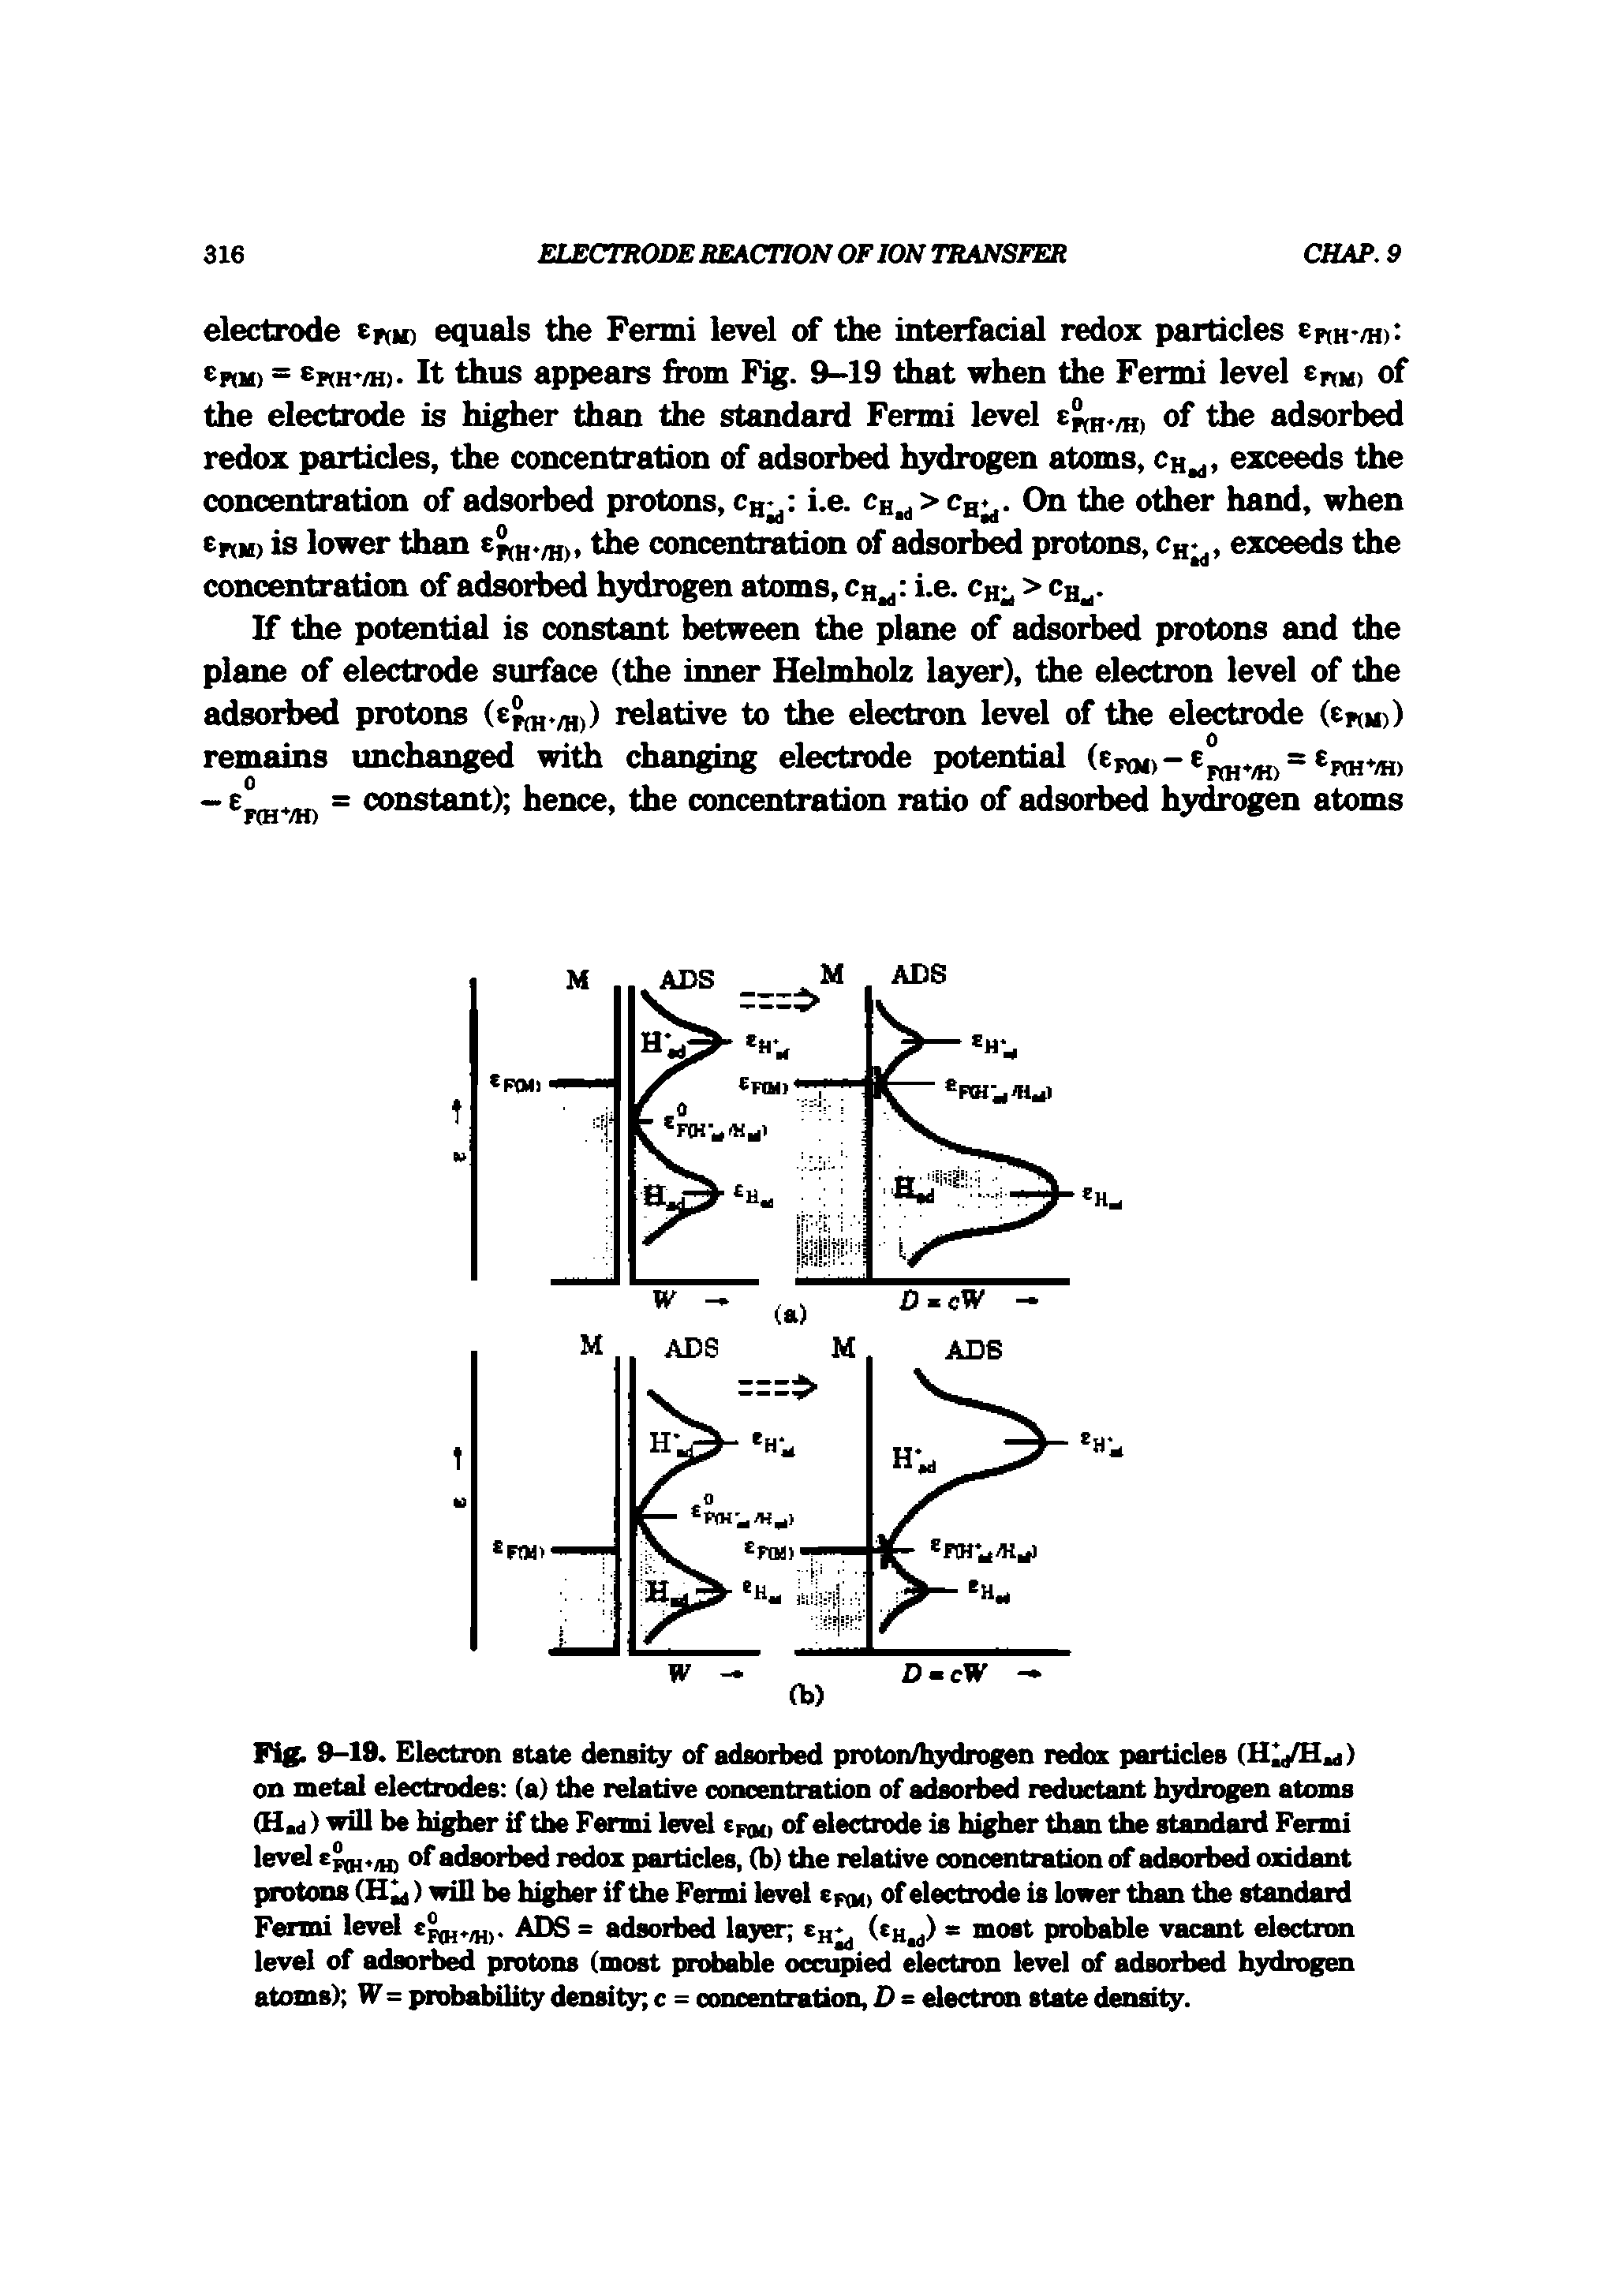 Fig. 9-19. Electron state density of adsorbed proton/lpndrogen redox particles on metal electrodes (a) the relative concentration of adsorbed reductant hydrogen atoms (Had) will be hitler if the Fermi level ef(h, of electrode is higher than the standard Fermi level of adsorbed redox particles, (b) the relative concentration of adsorbed oxidant...